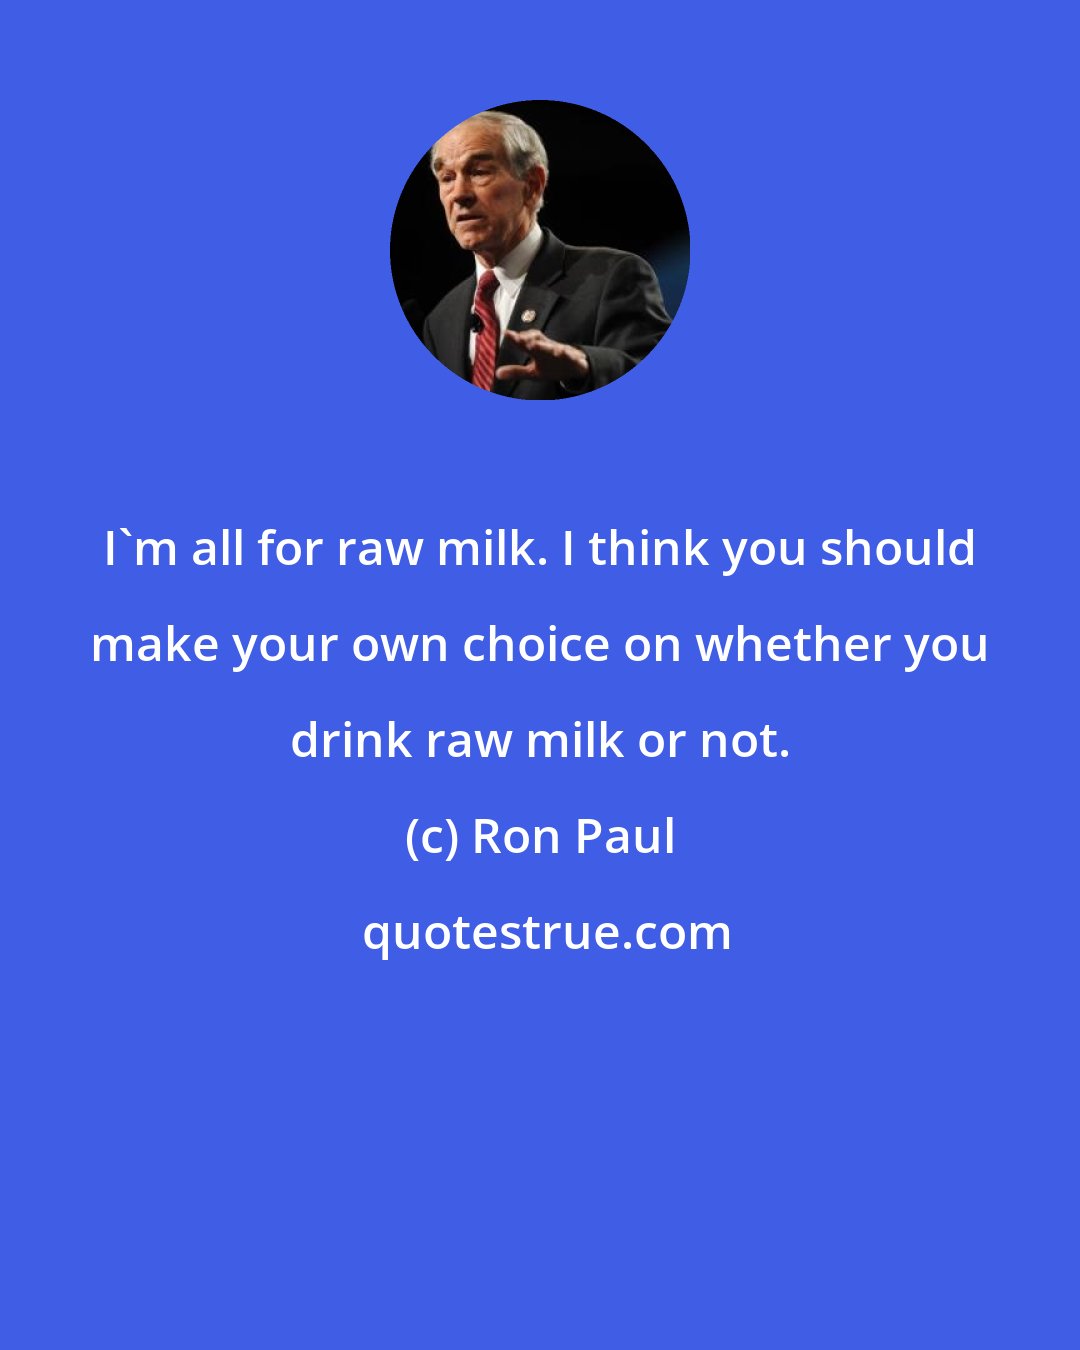 Ron Paul: I'm all for raw milk. I think you should make your own choice on whether you drink raw milk or not.